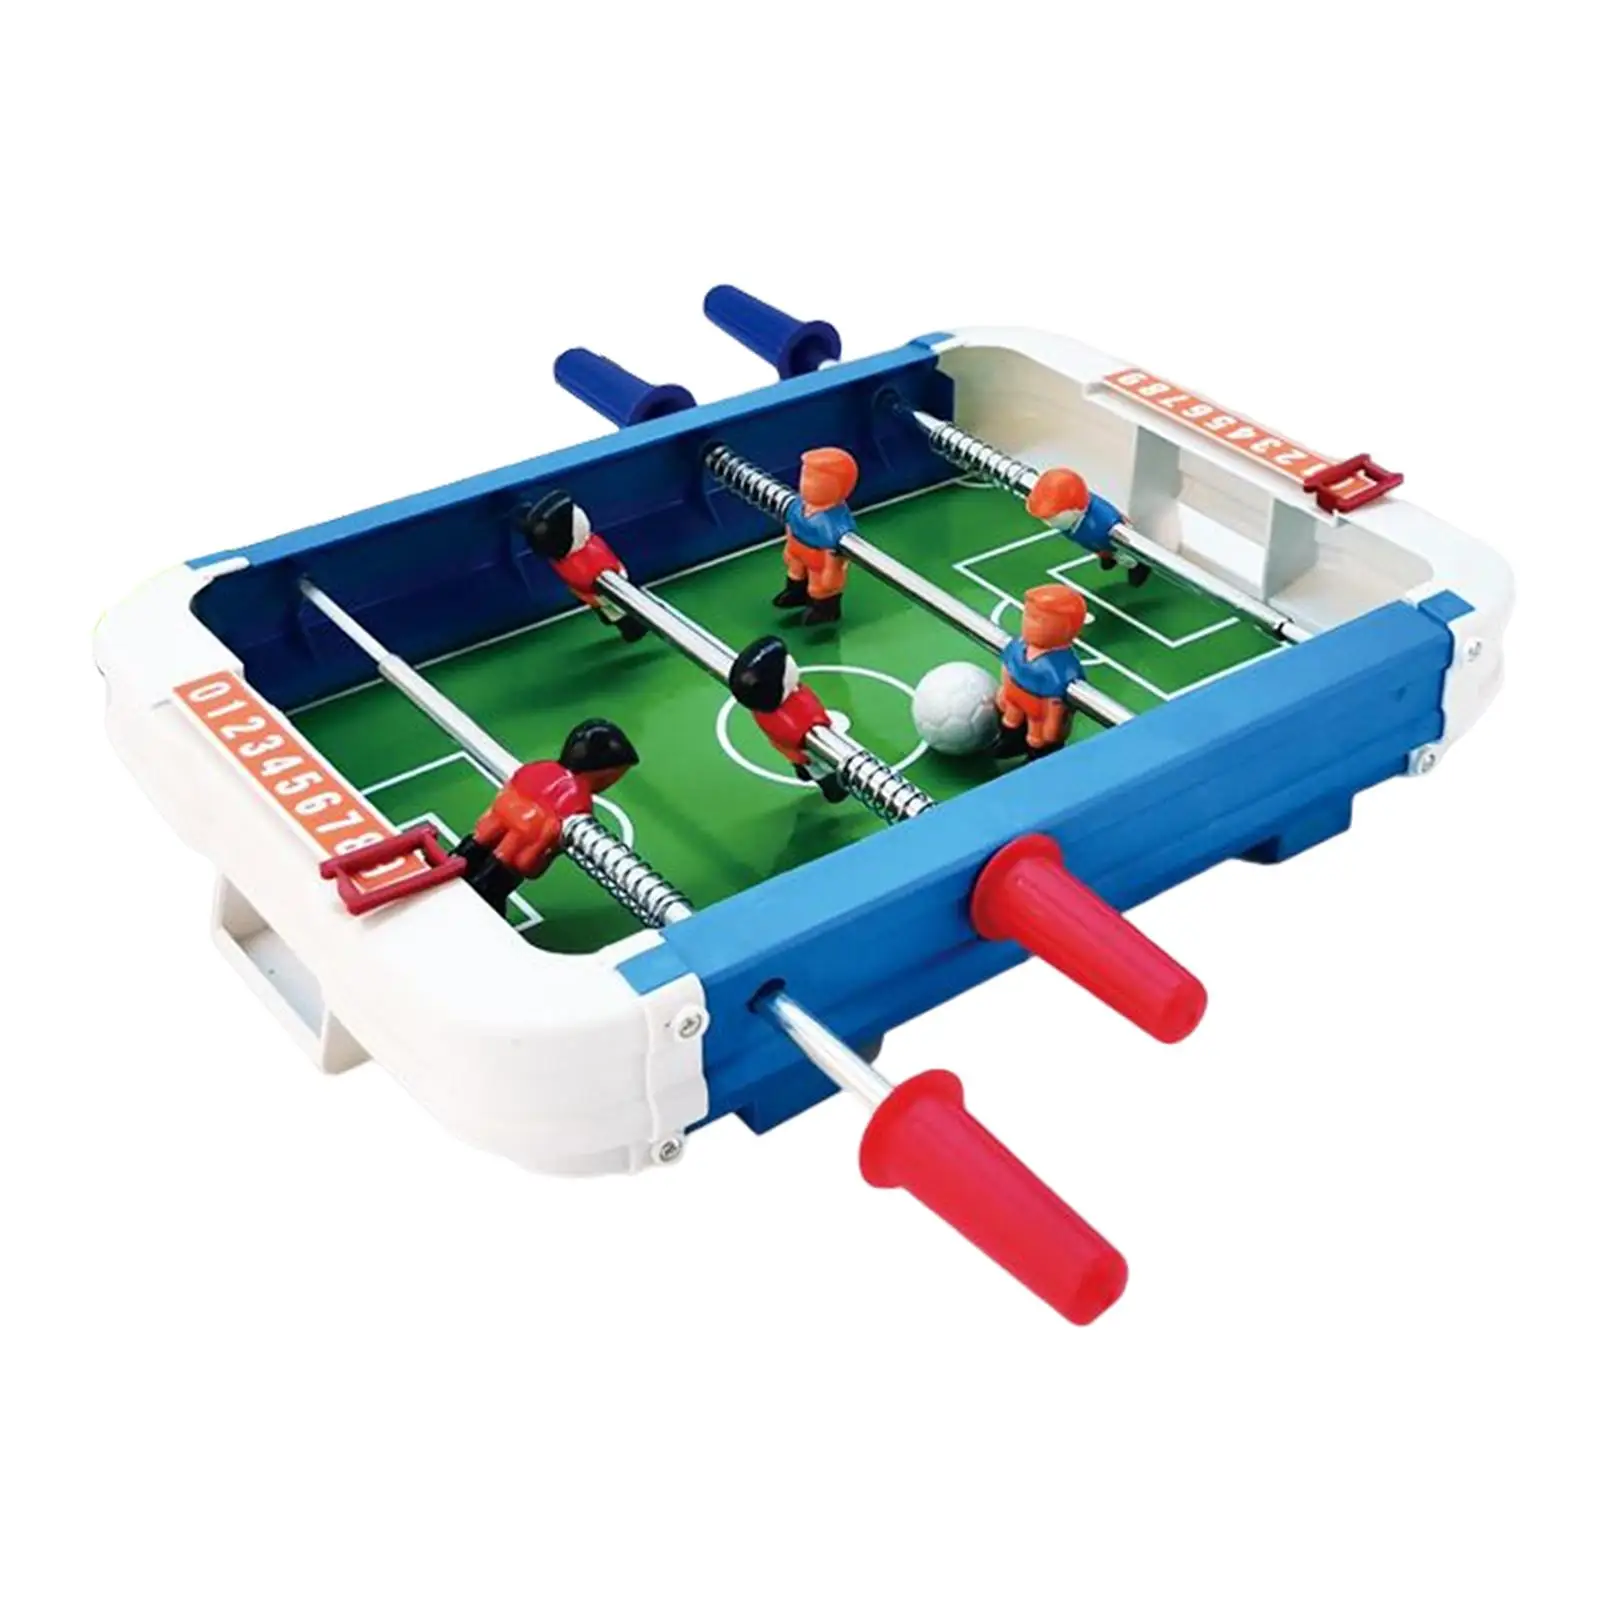 Compact Mini Foosball Table Top Football Game for Kids Birthday Gifts